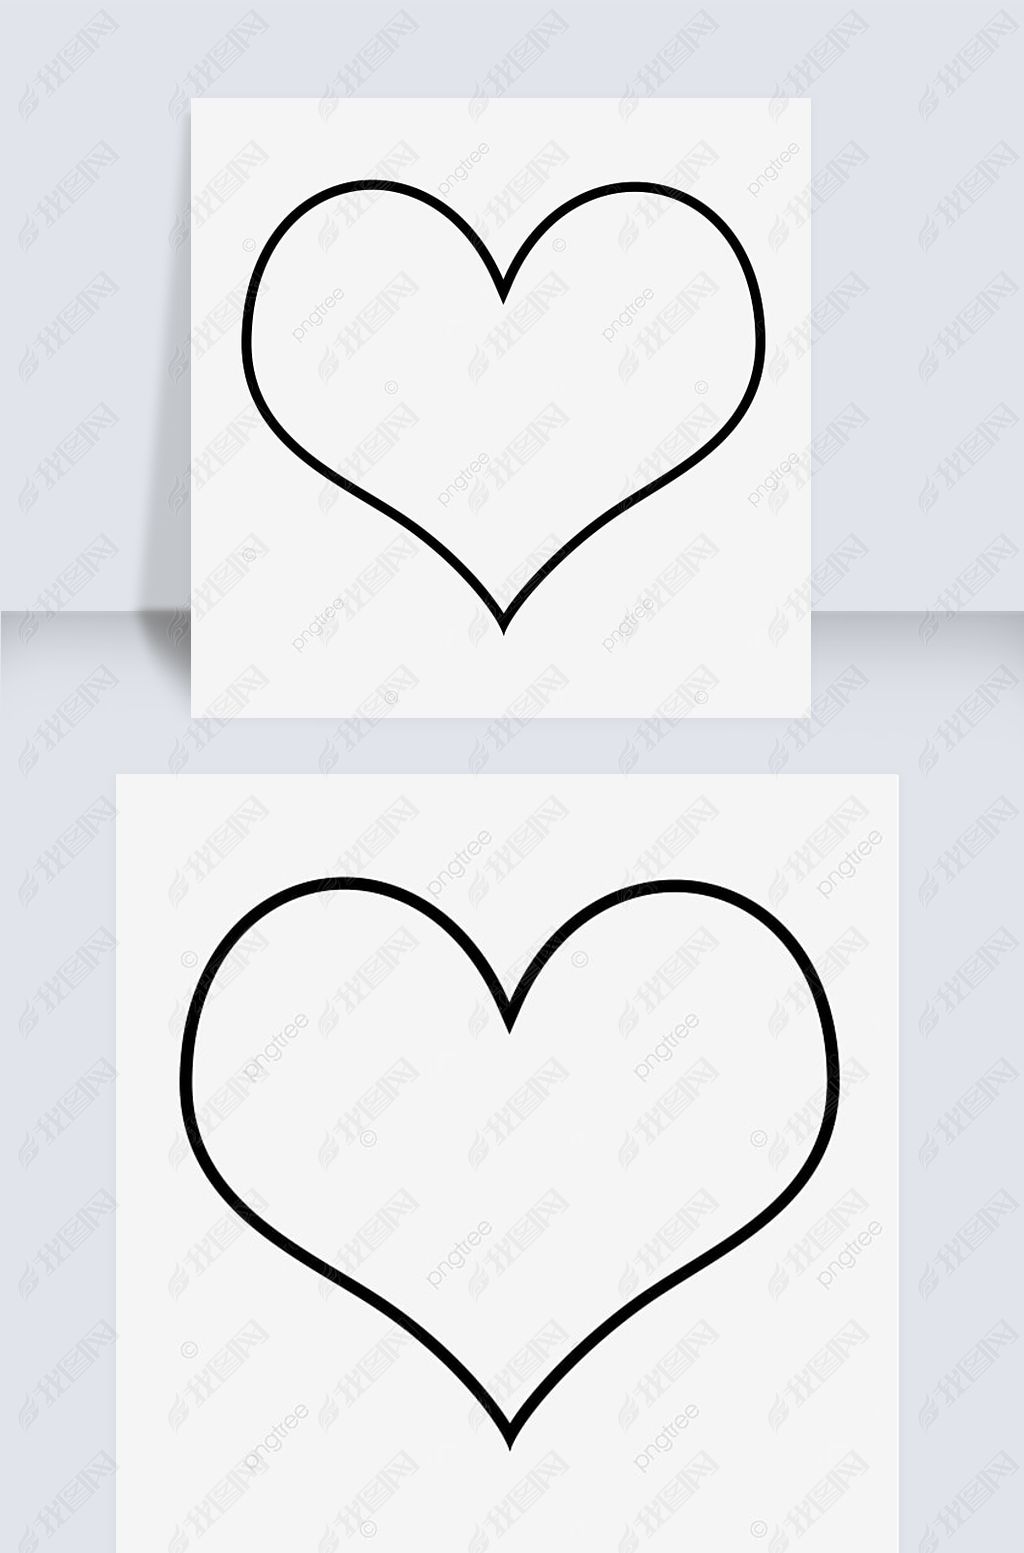 heart clipart black and whiteװ԰ĺڿ